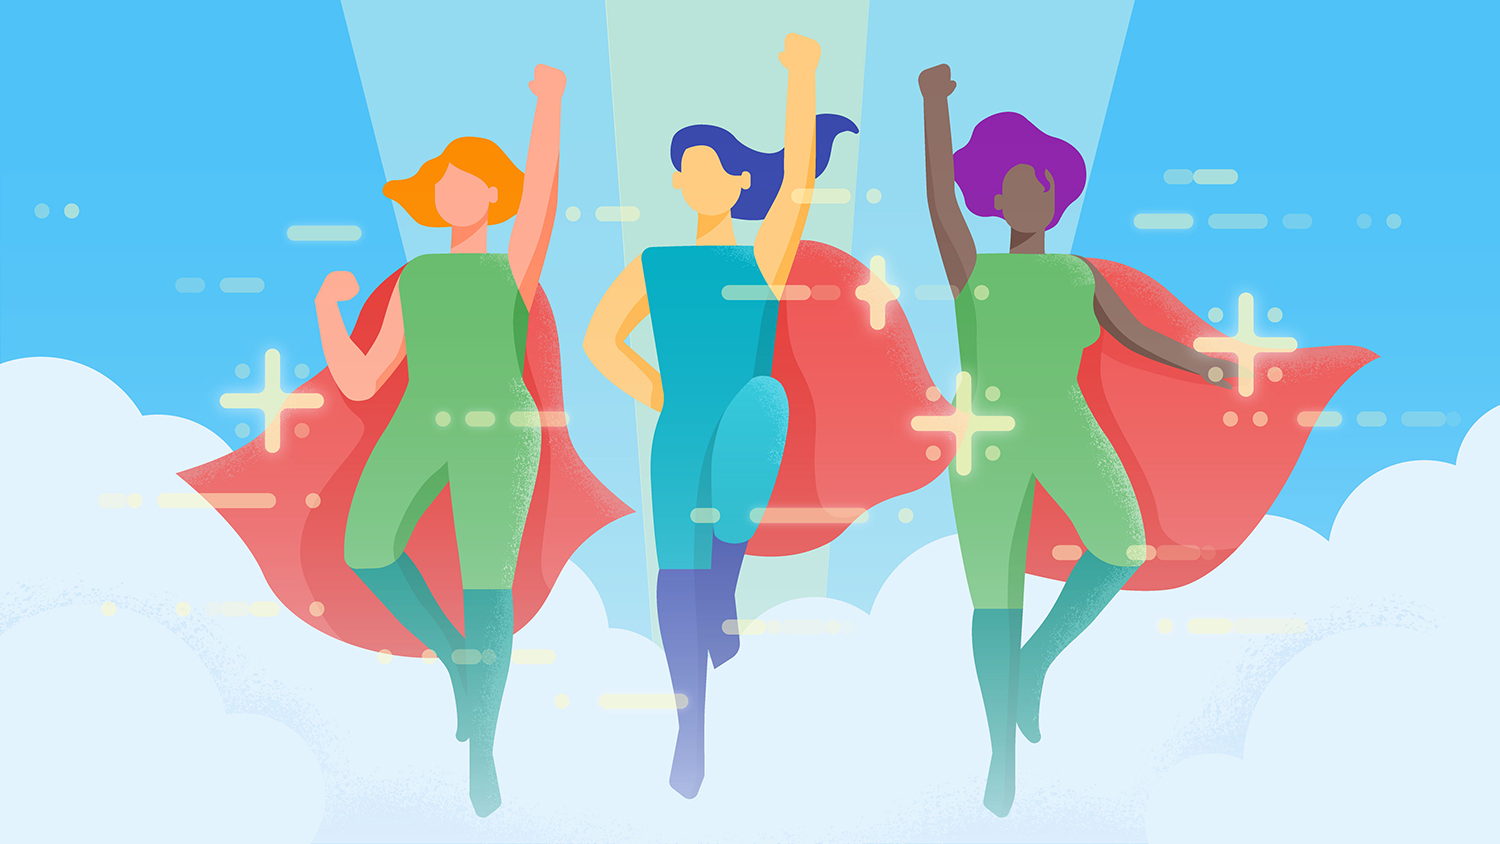 google_play-womens_international_day_for_games_vertical.